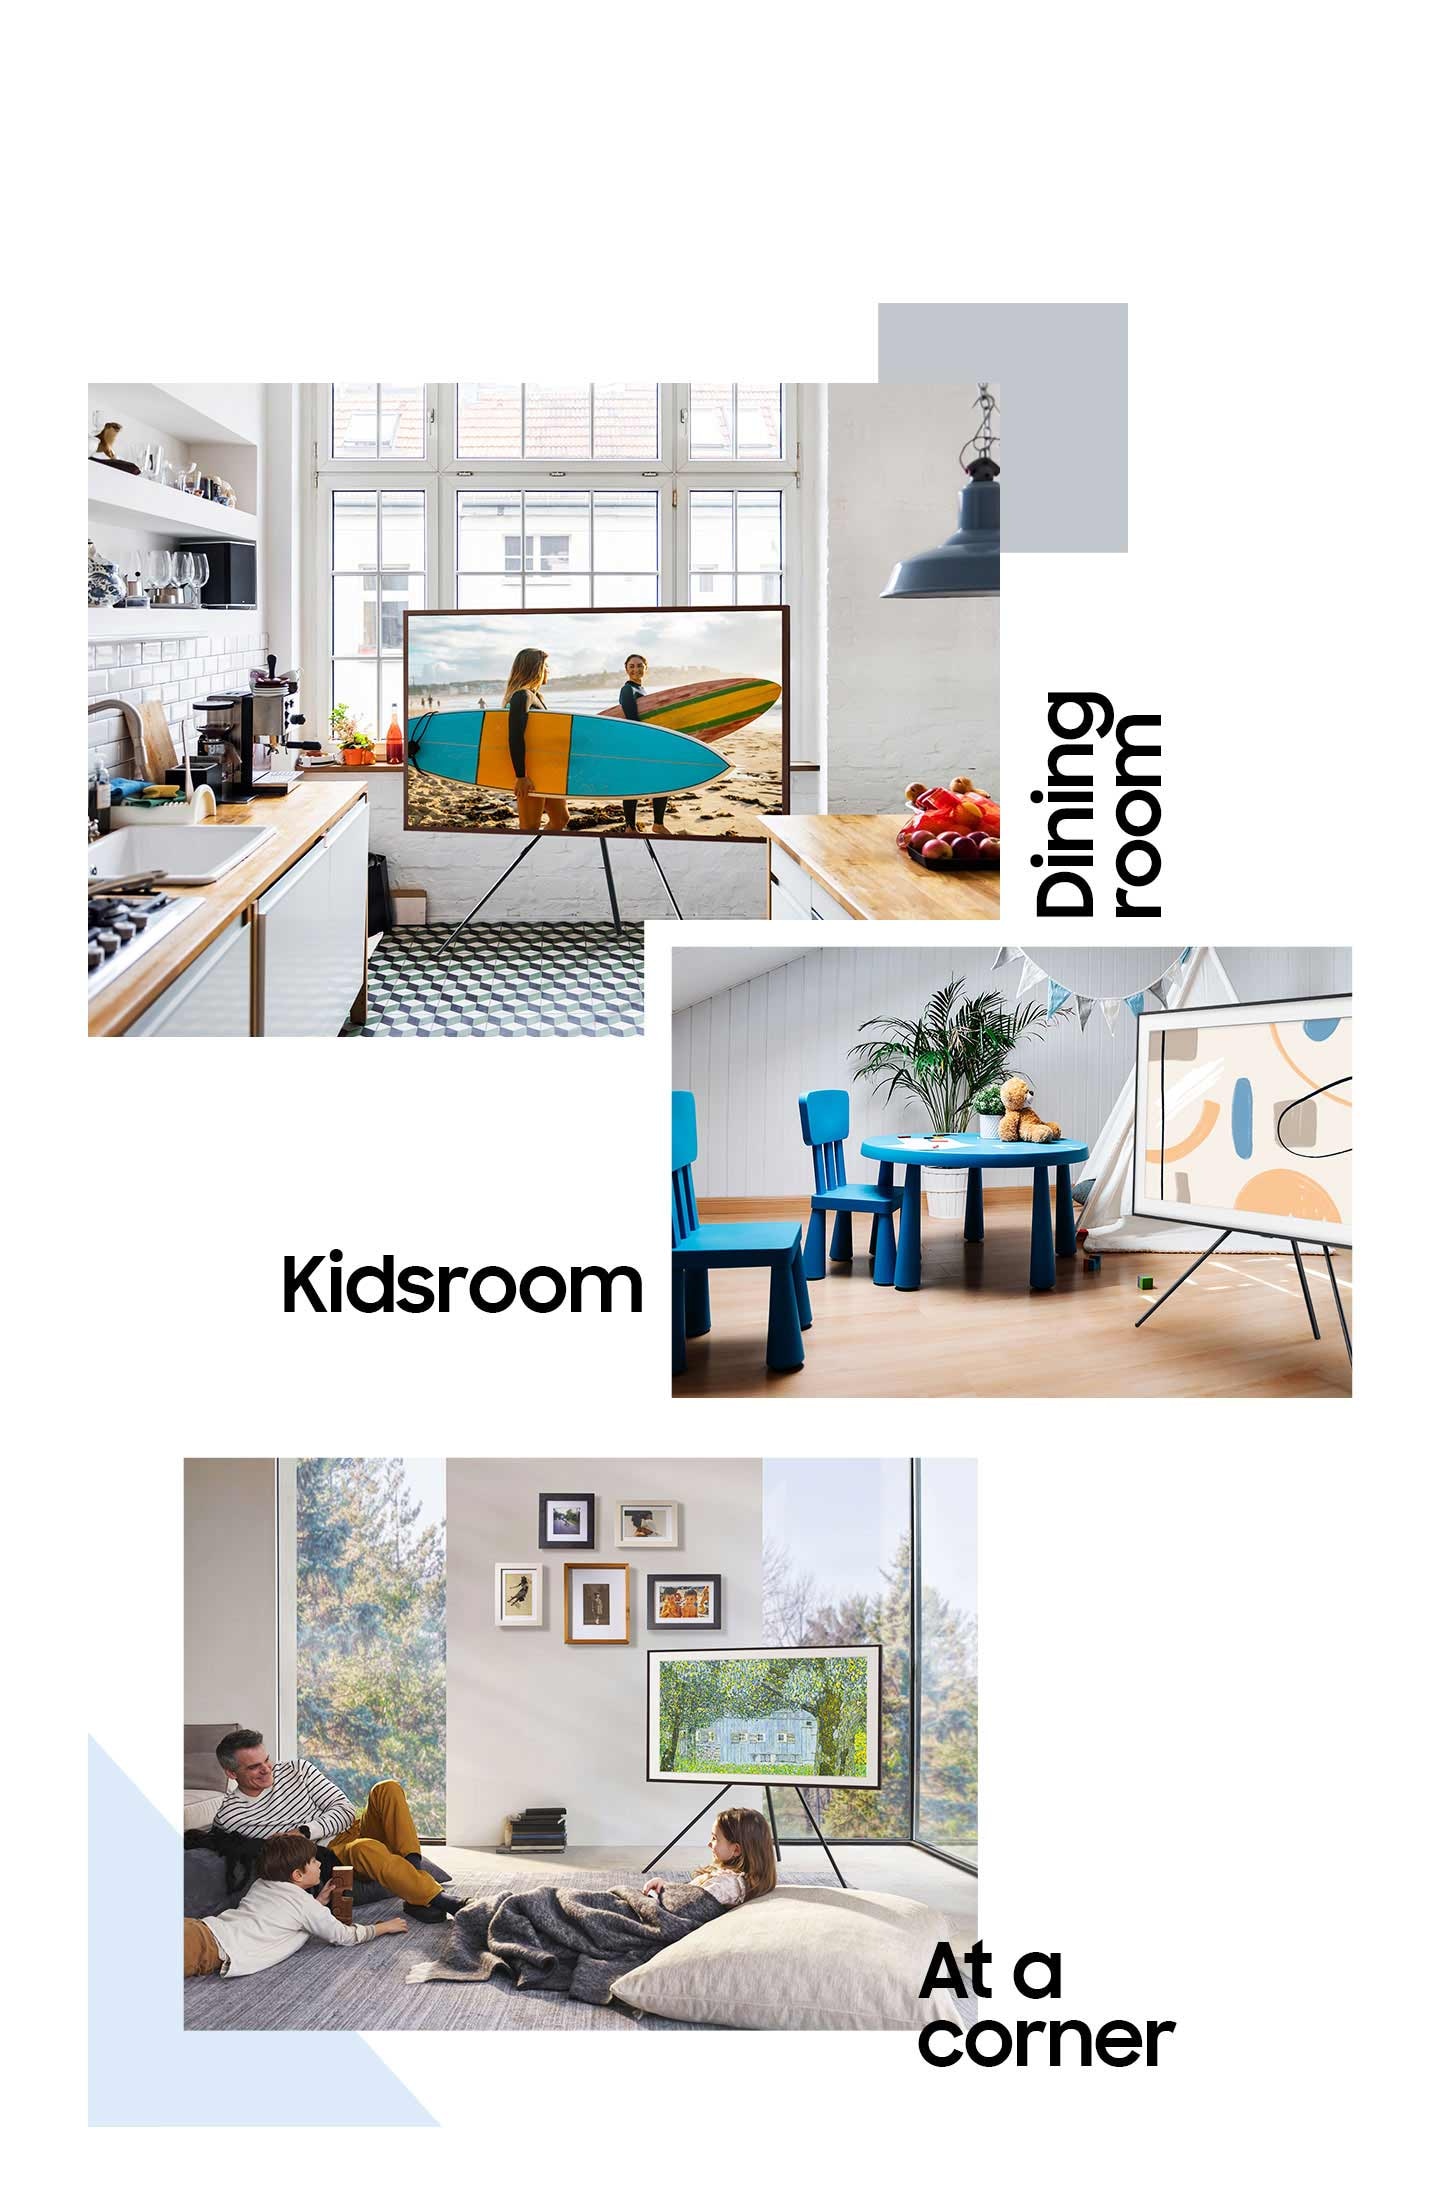 Three different scenarios of the Frame TV on a Studio Stand are layered on top of eachother. The top is labeled Dining room, where the TV has its back to a window, with twogirls holding surfboards at a beach onscreen. The middle is labeled Kidsroom, with the TVset next to a small blue kids table, two chairs, and a tent. Abstract art is onscreen. The bottom scenario is labeled at a corner. Here the TV is placed in a stylish living room near the windows with its back to the corner next to a large floor-to-ceiling windows. A father leans against a sofa, while the son lies on the carpet. The daughter leans against a big pillow under a blanket. A painting of a lake with trees is onscreen.